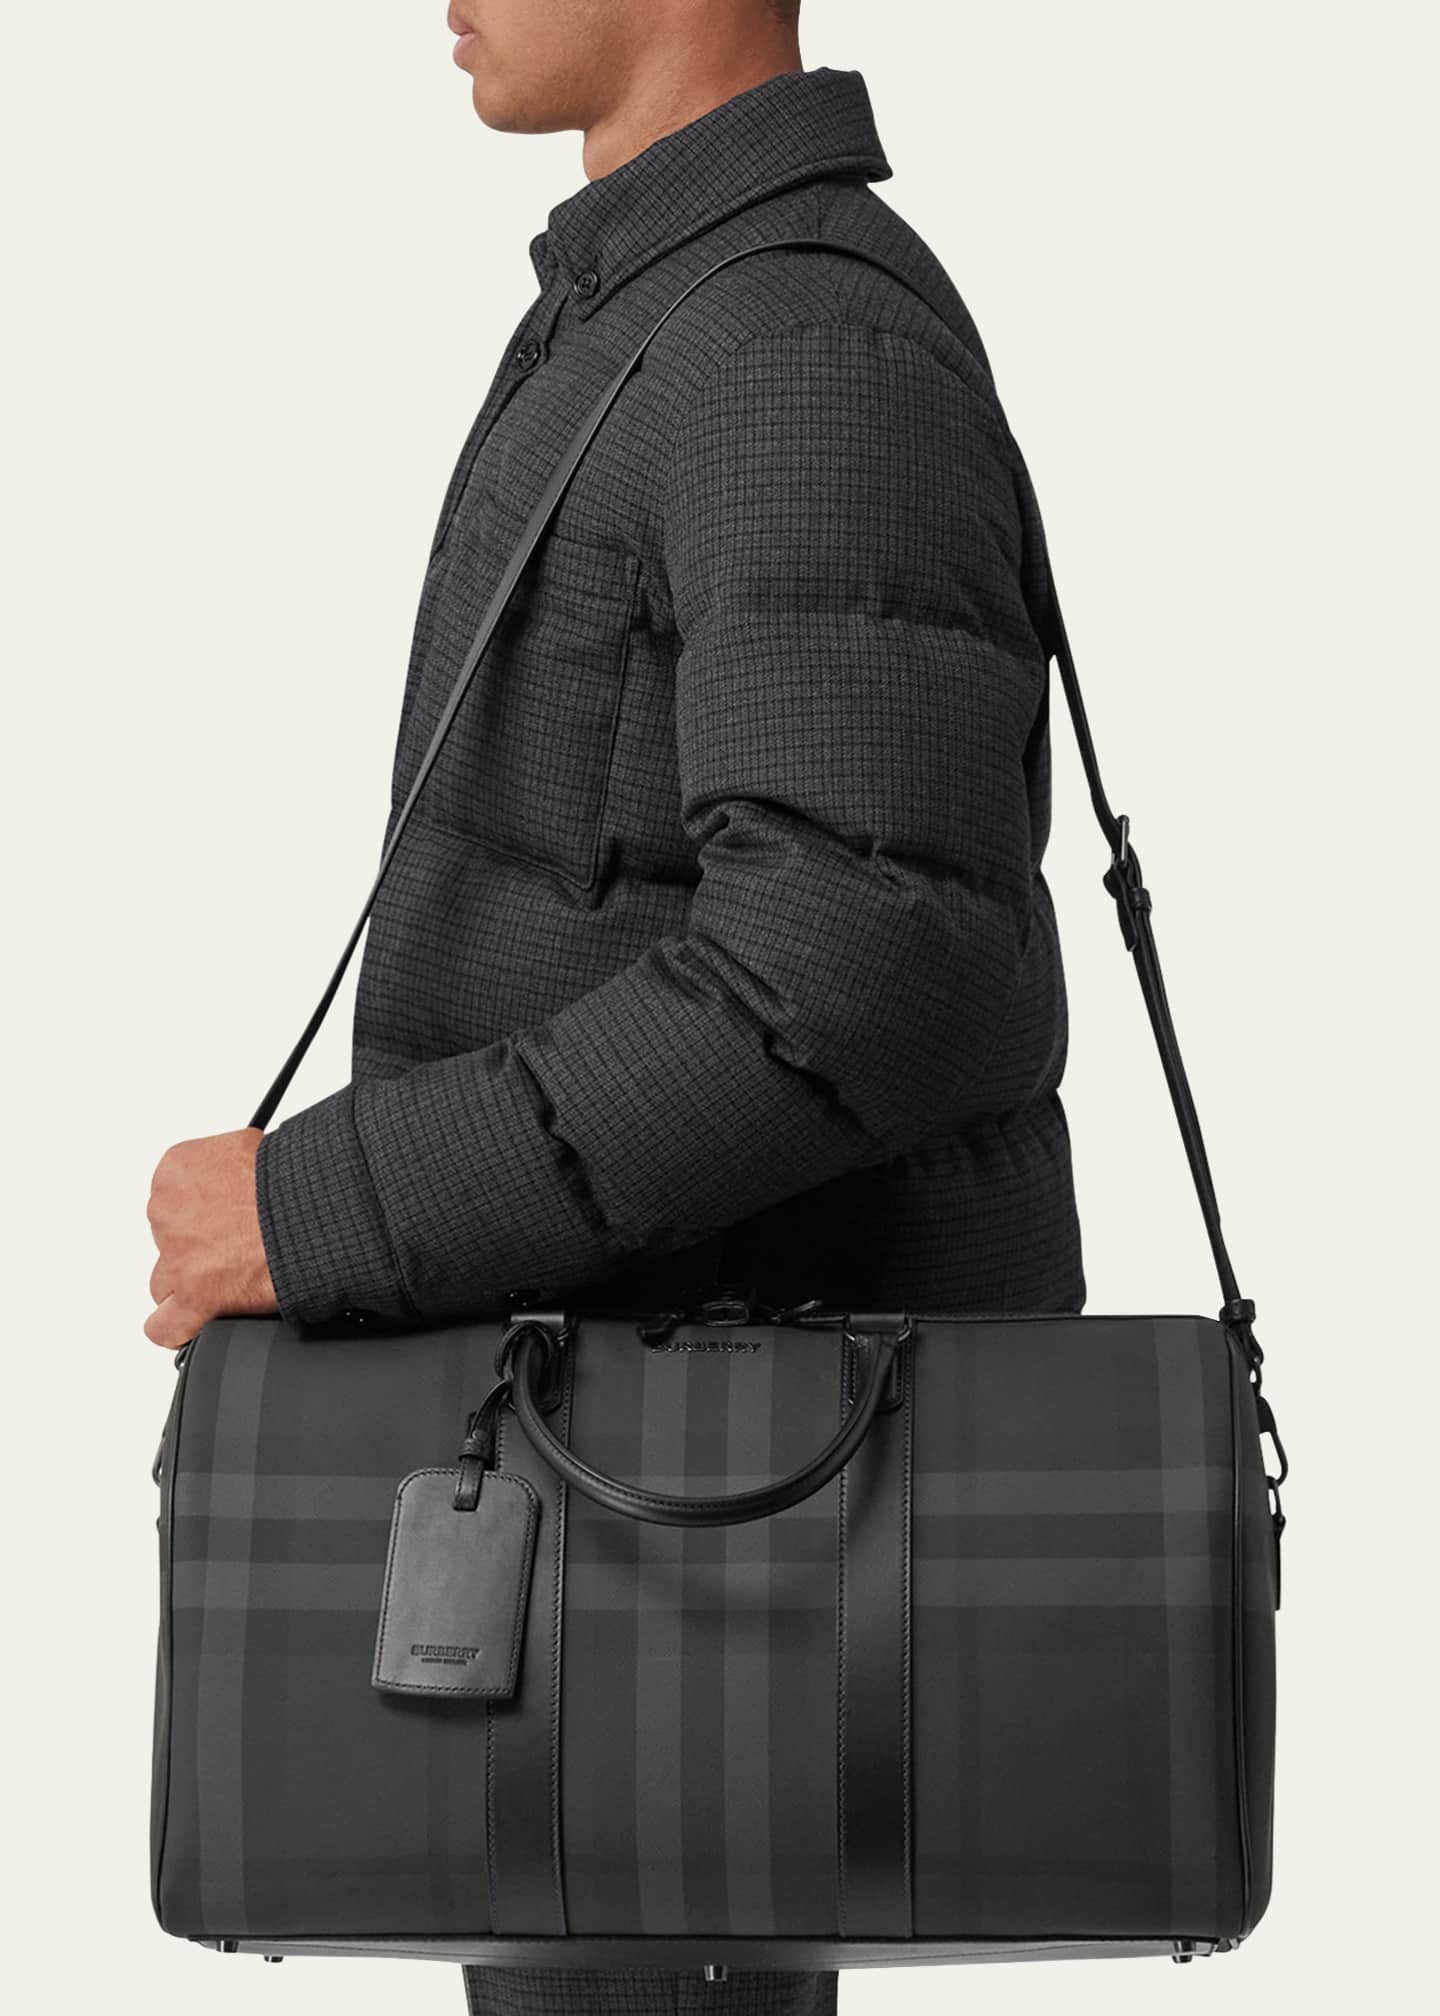 Burberry Men's Exaggerated Check Duffel Bag